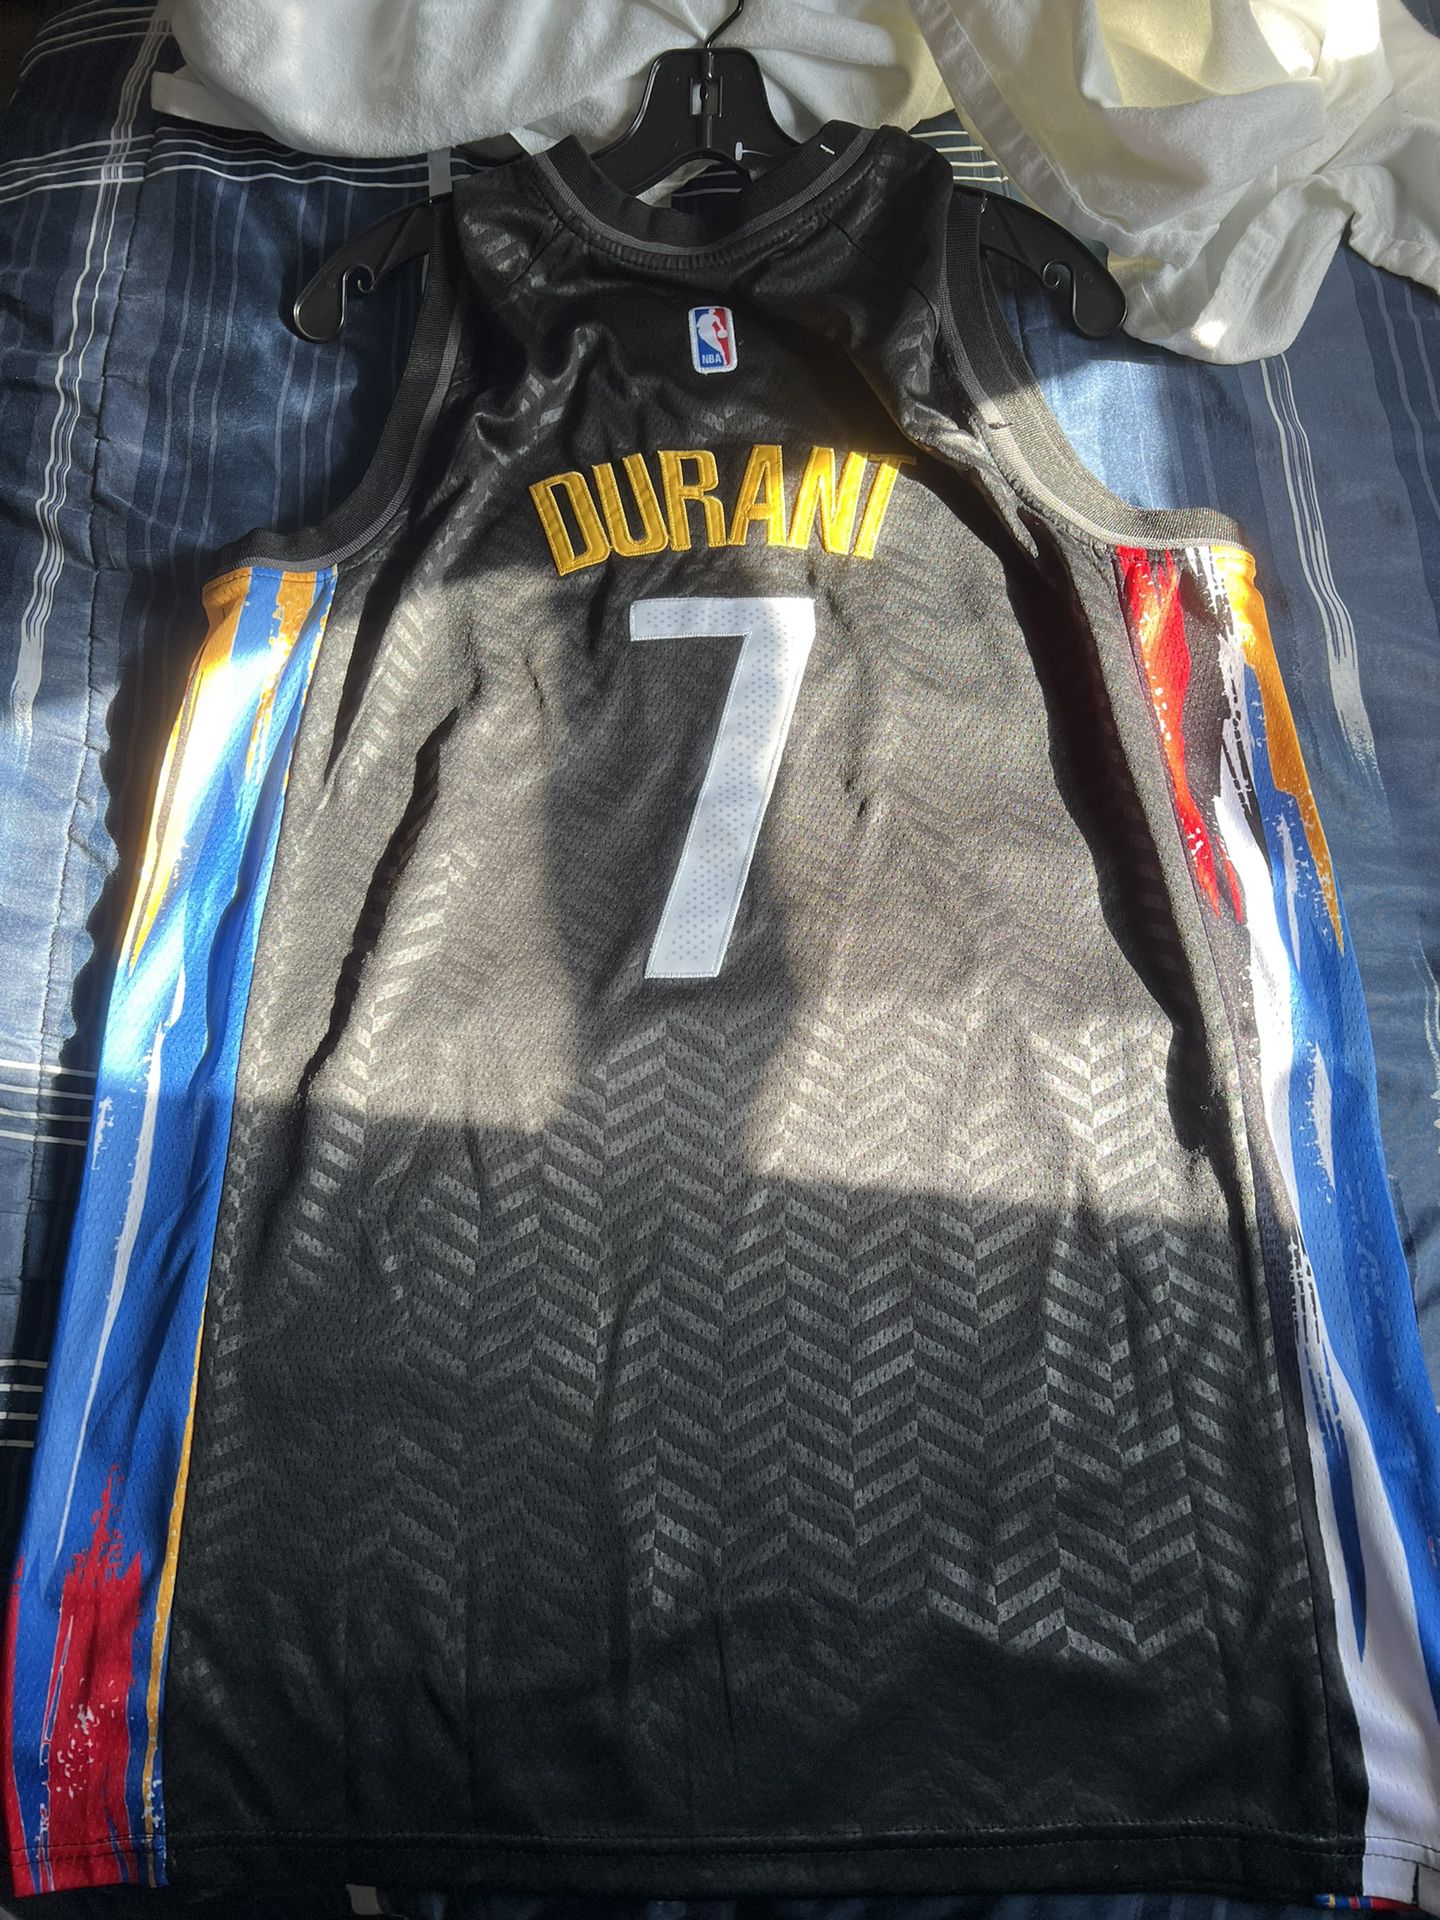 *NEW* Kevin Durant (STITCHED) Brooklyn Nets Jersey - Size 48 - Men